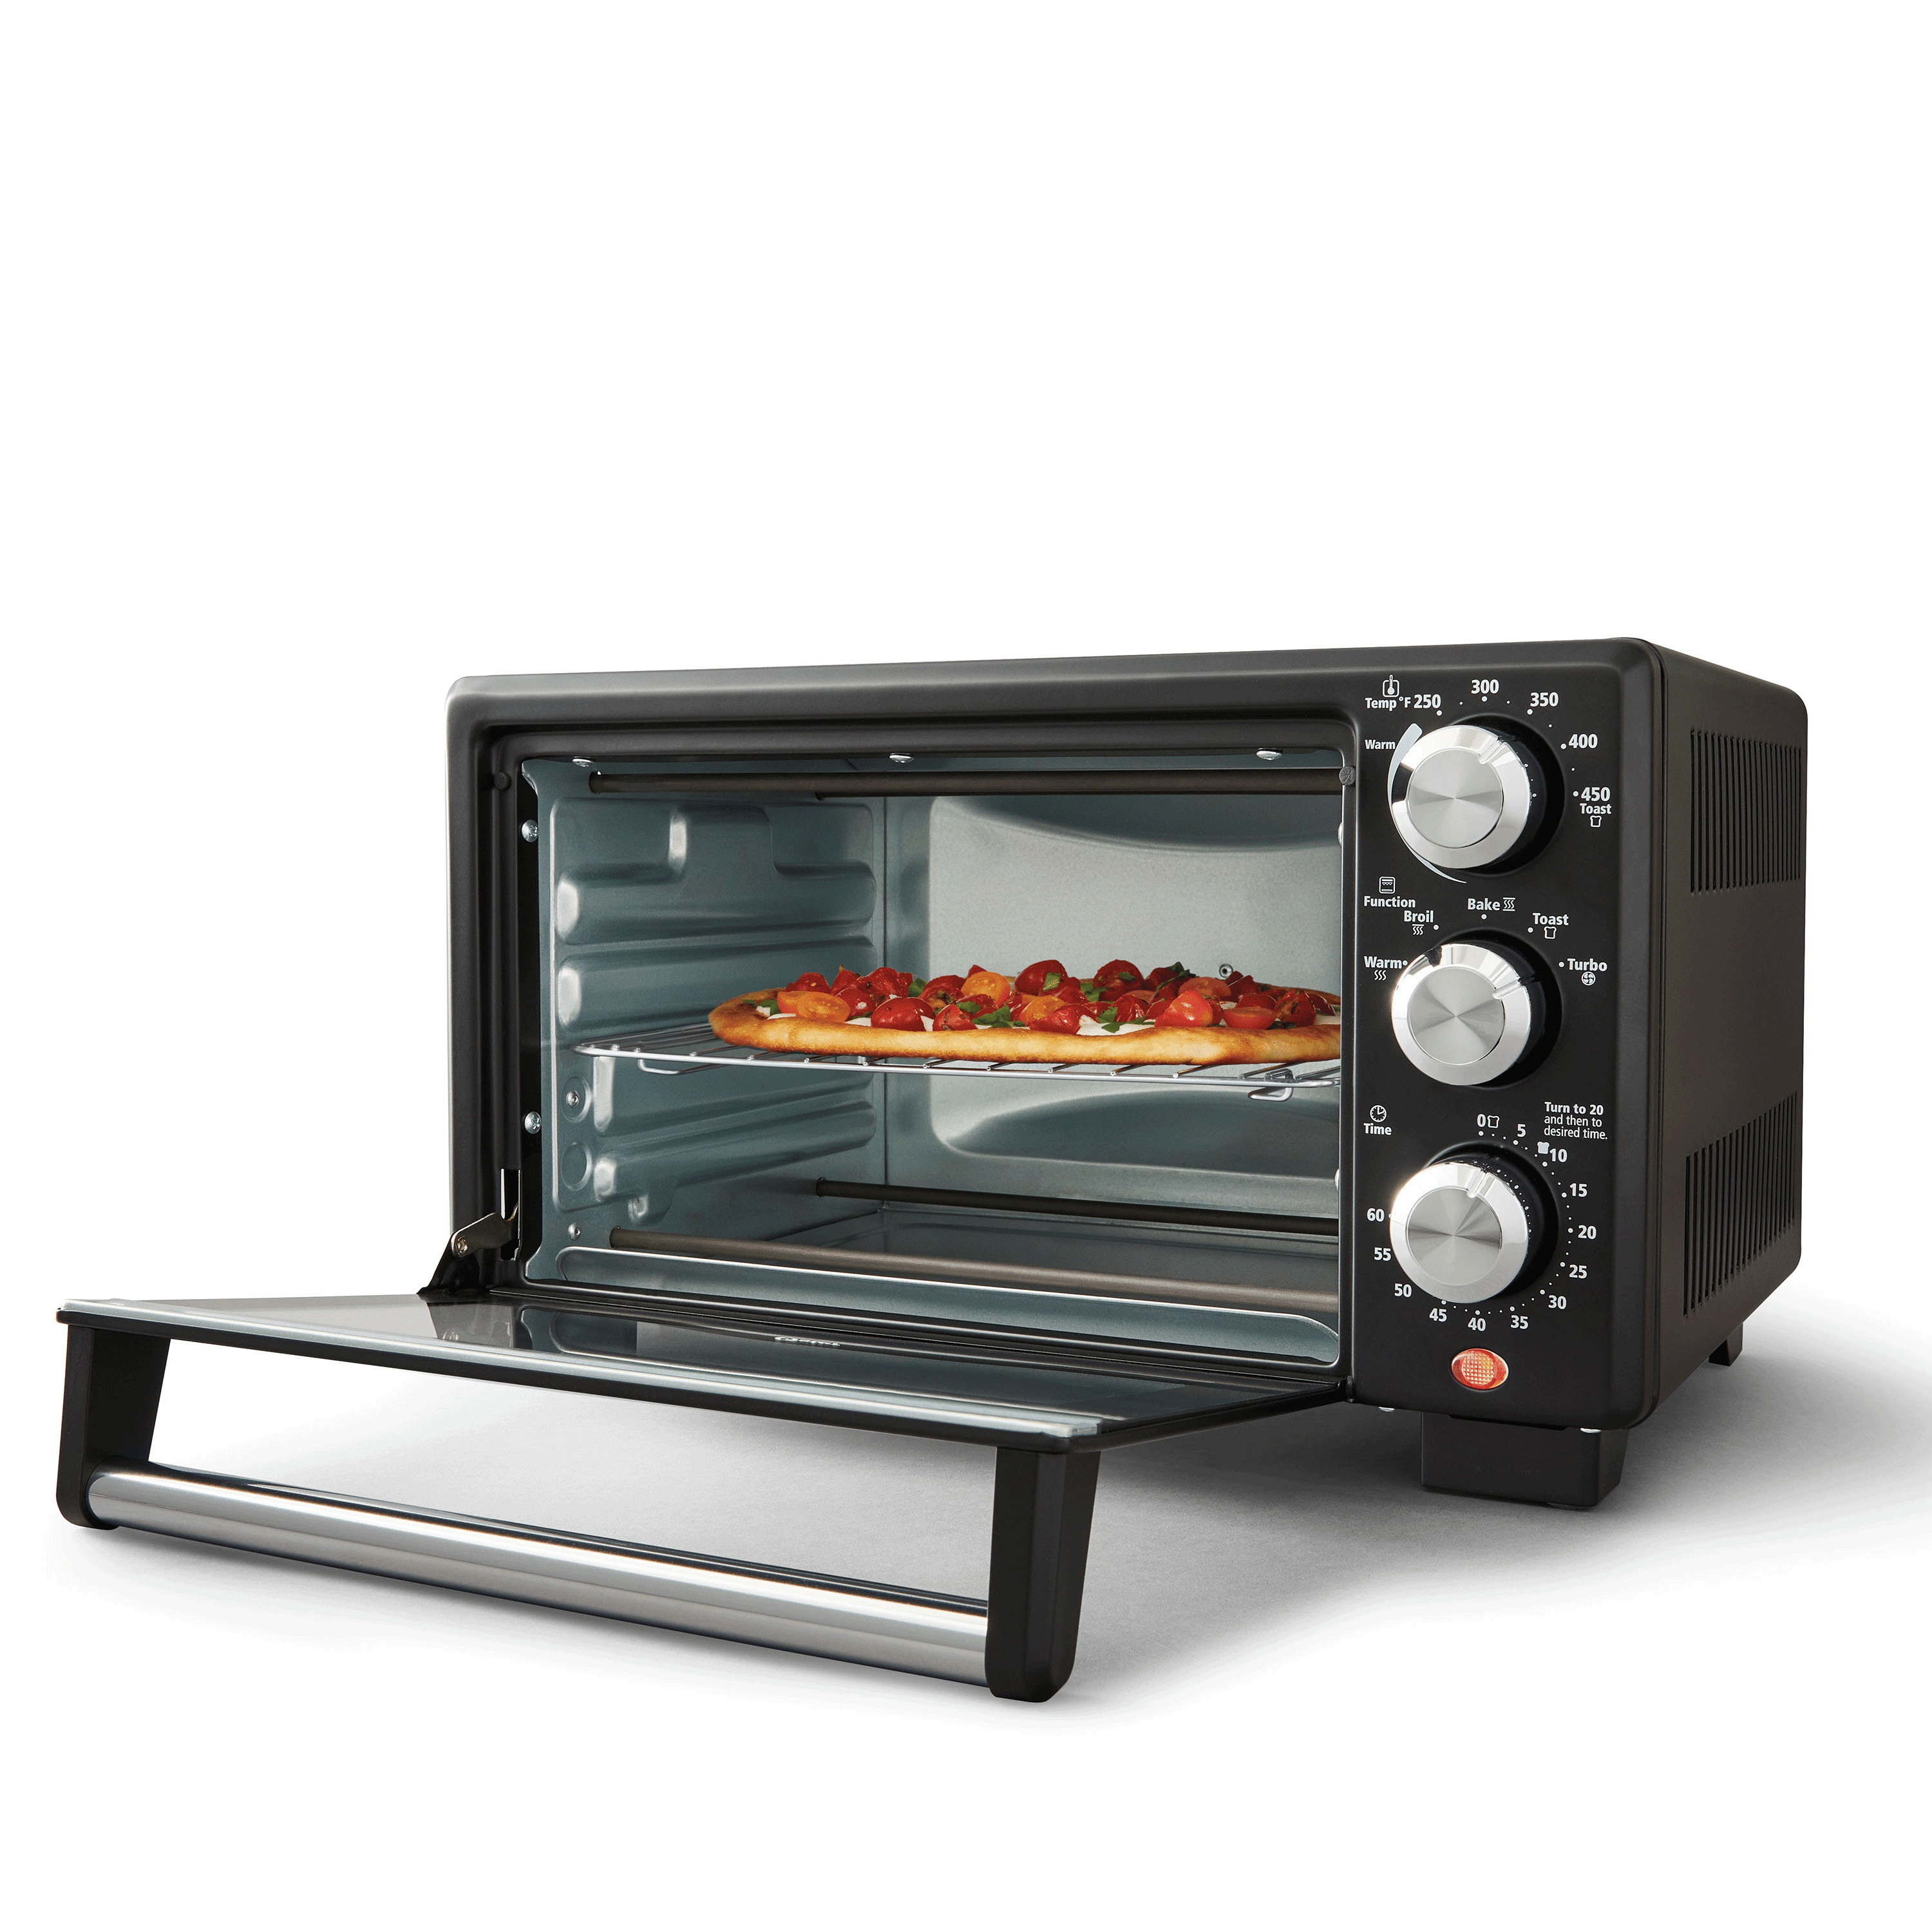  Dash Express Countertop Toaster Oven with Quartz Technology,  Bake, Broil, and Toast with 4 Slice Capacity and Pizza Capability – Black:  Home & Kitchen